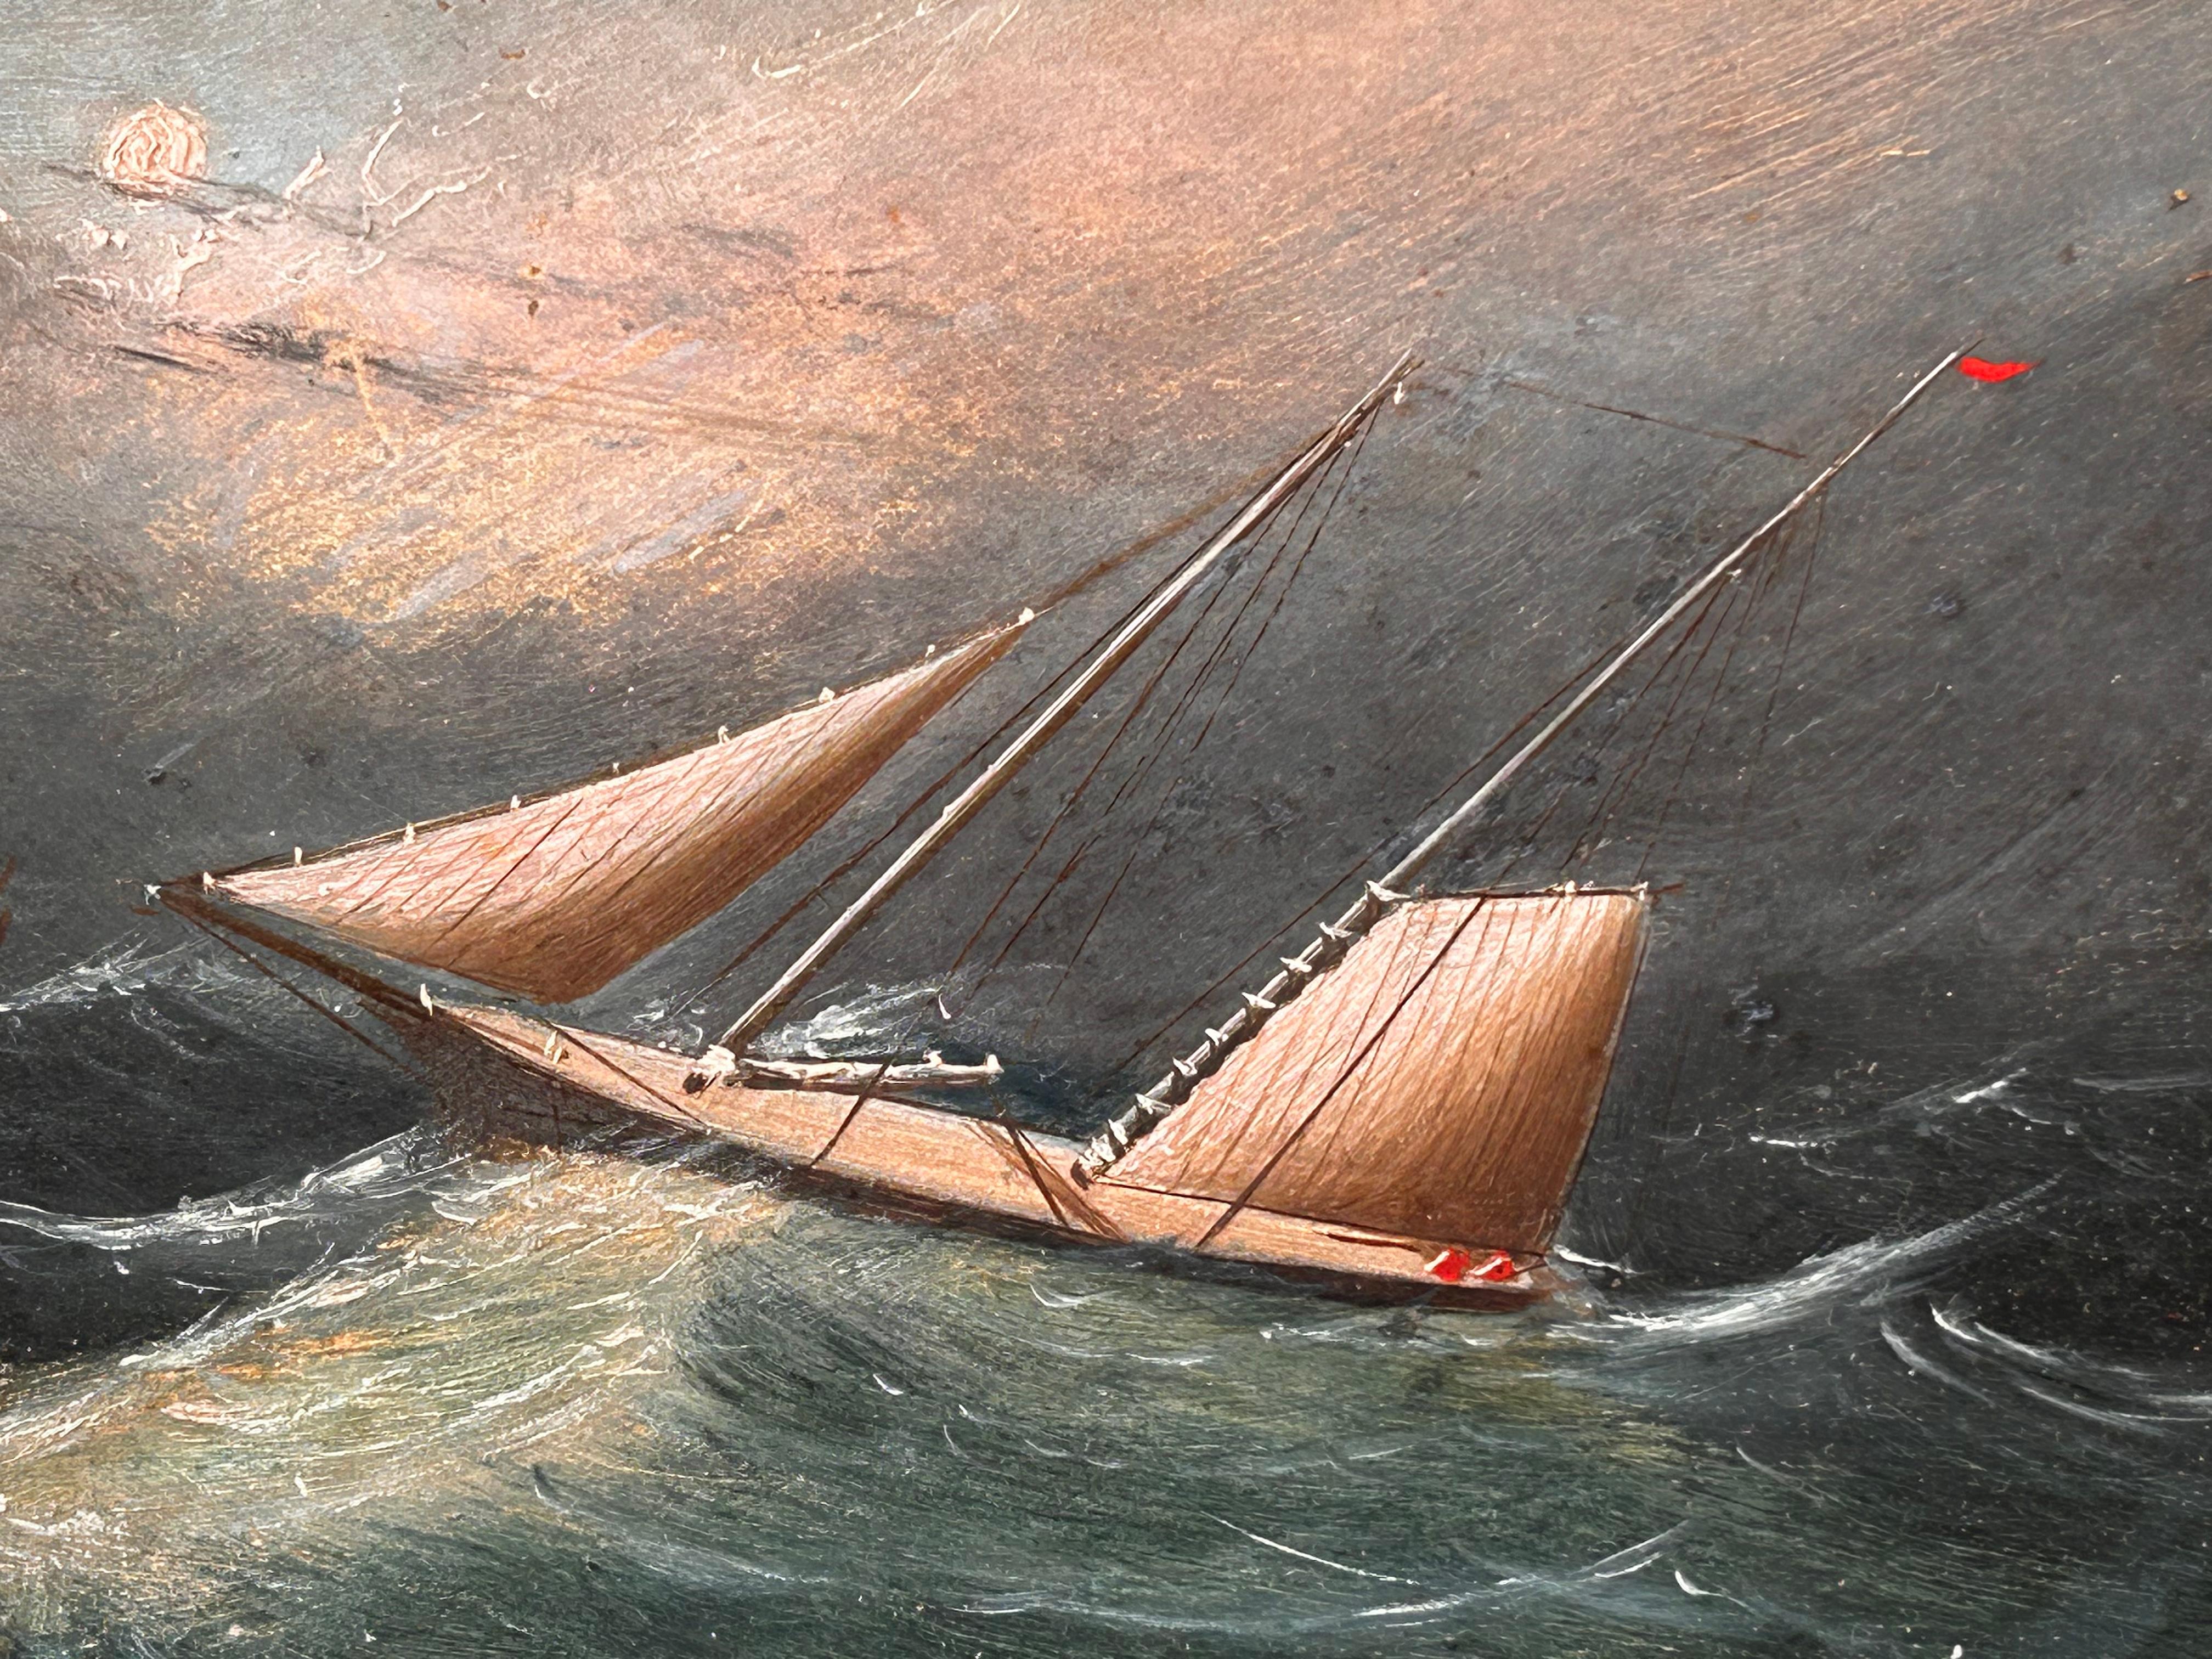 Landscape of Sailboat Racing Off the Coast Near the Lighthouse - Impressionist Painting by Clement Drew